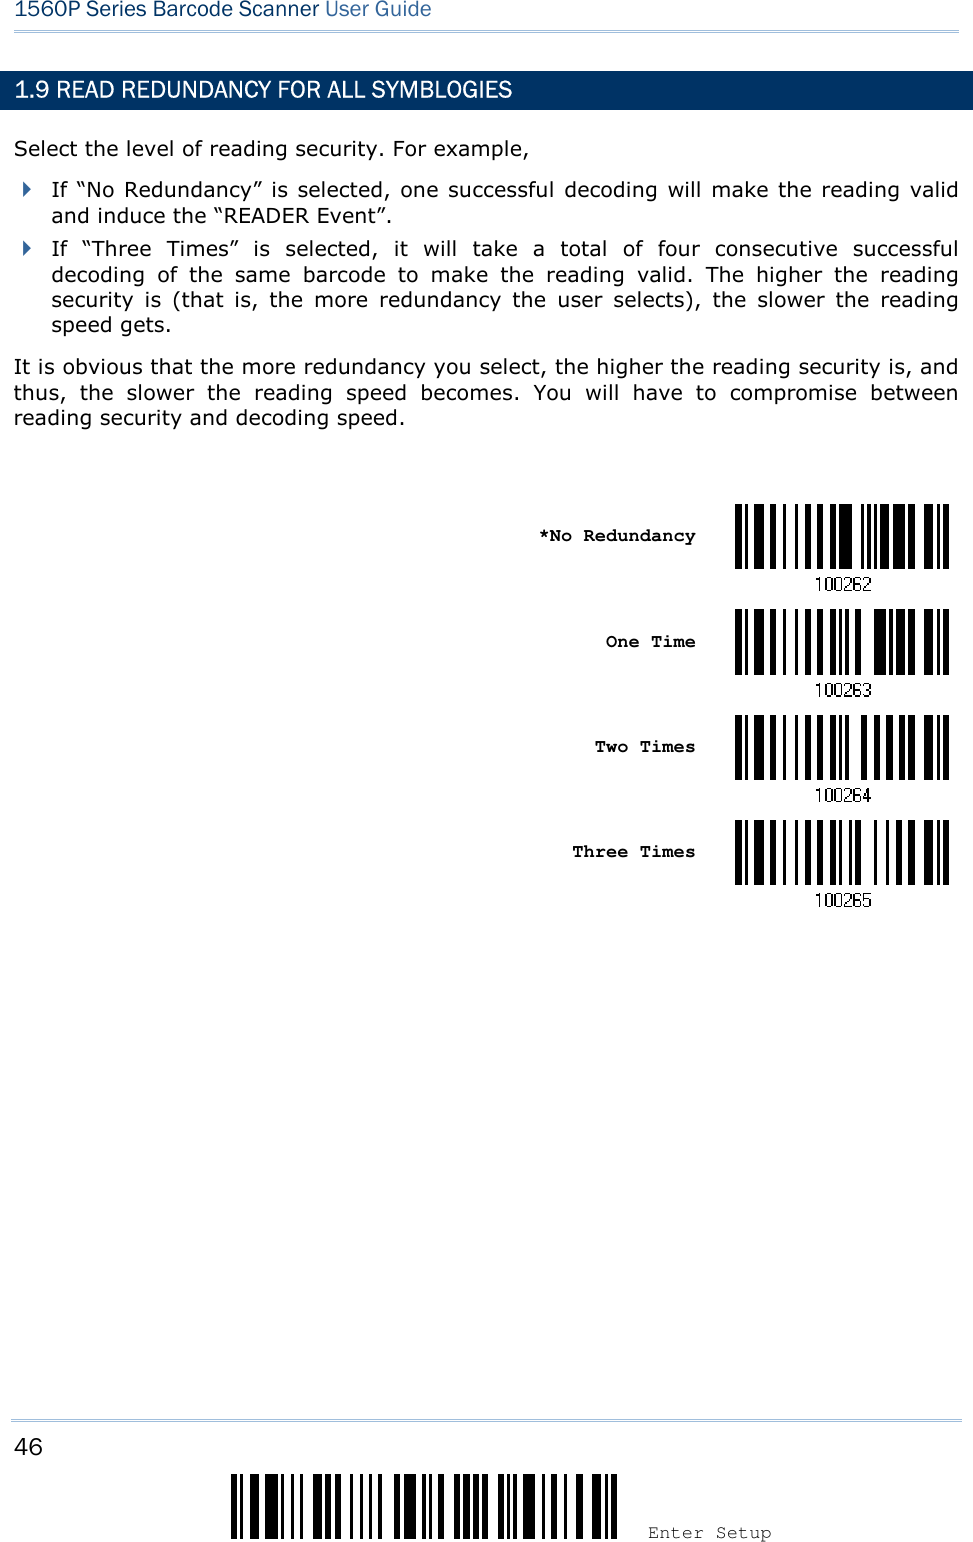 46 Enter Setup 1560P Series Barcode Scanner User Guide 1.9 READ REDUNDANCY FOR ALL SYMBLOGIES Select the level of reading security. For example, If “No Redundancy” is selected, one successful decoding will make the reading validand induce the “READER Event”.If  “Three  Times”  is  selected,  it  will  take  a  total  of  four  consecutive  successfuldecoding  of  the  same  barcode  to  make  the  reading  valid.  The  higher  the  readingsecurity  is  (that  is,  the  more  redundancy  the  user  selects),  the  slower  the  readingspeed gets.It is obvious that the more redundancy you select, the higher the reading security is, and thus,  the  slower  the  reading  speed  becomes.  You  will  have  to  compromise  between reading security and decoding speed. *No RedundancyOne Time Two Times Three Times 